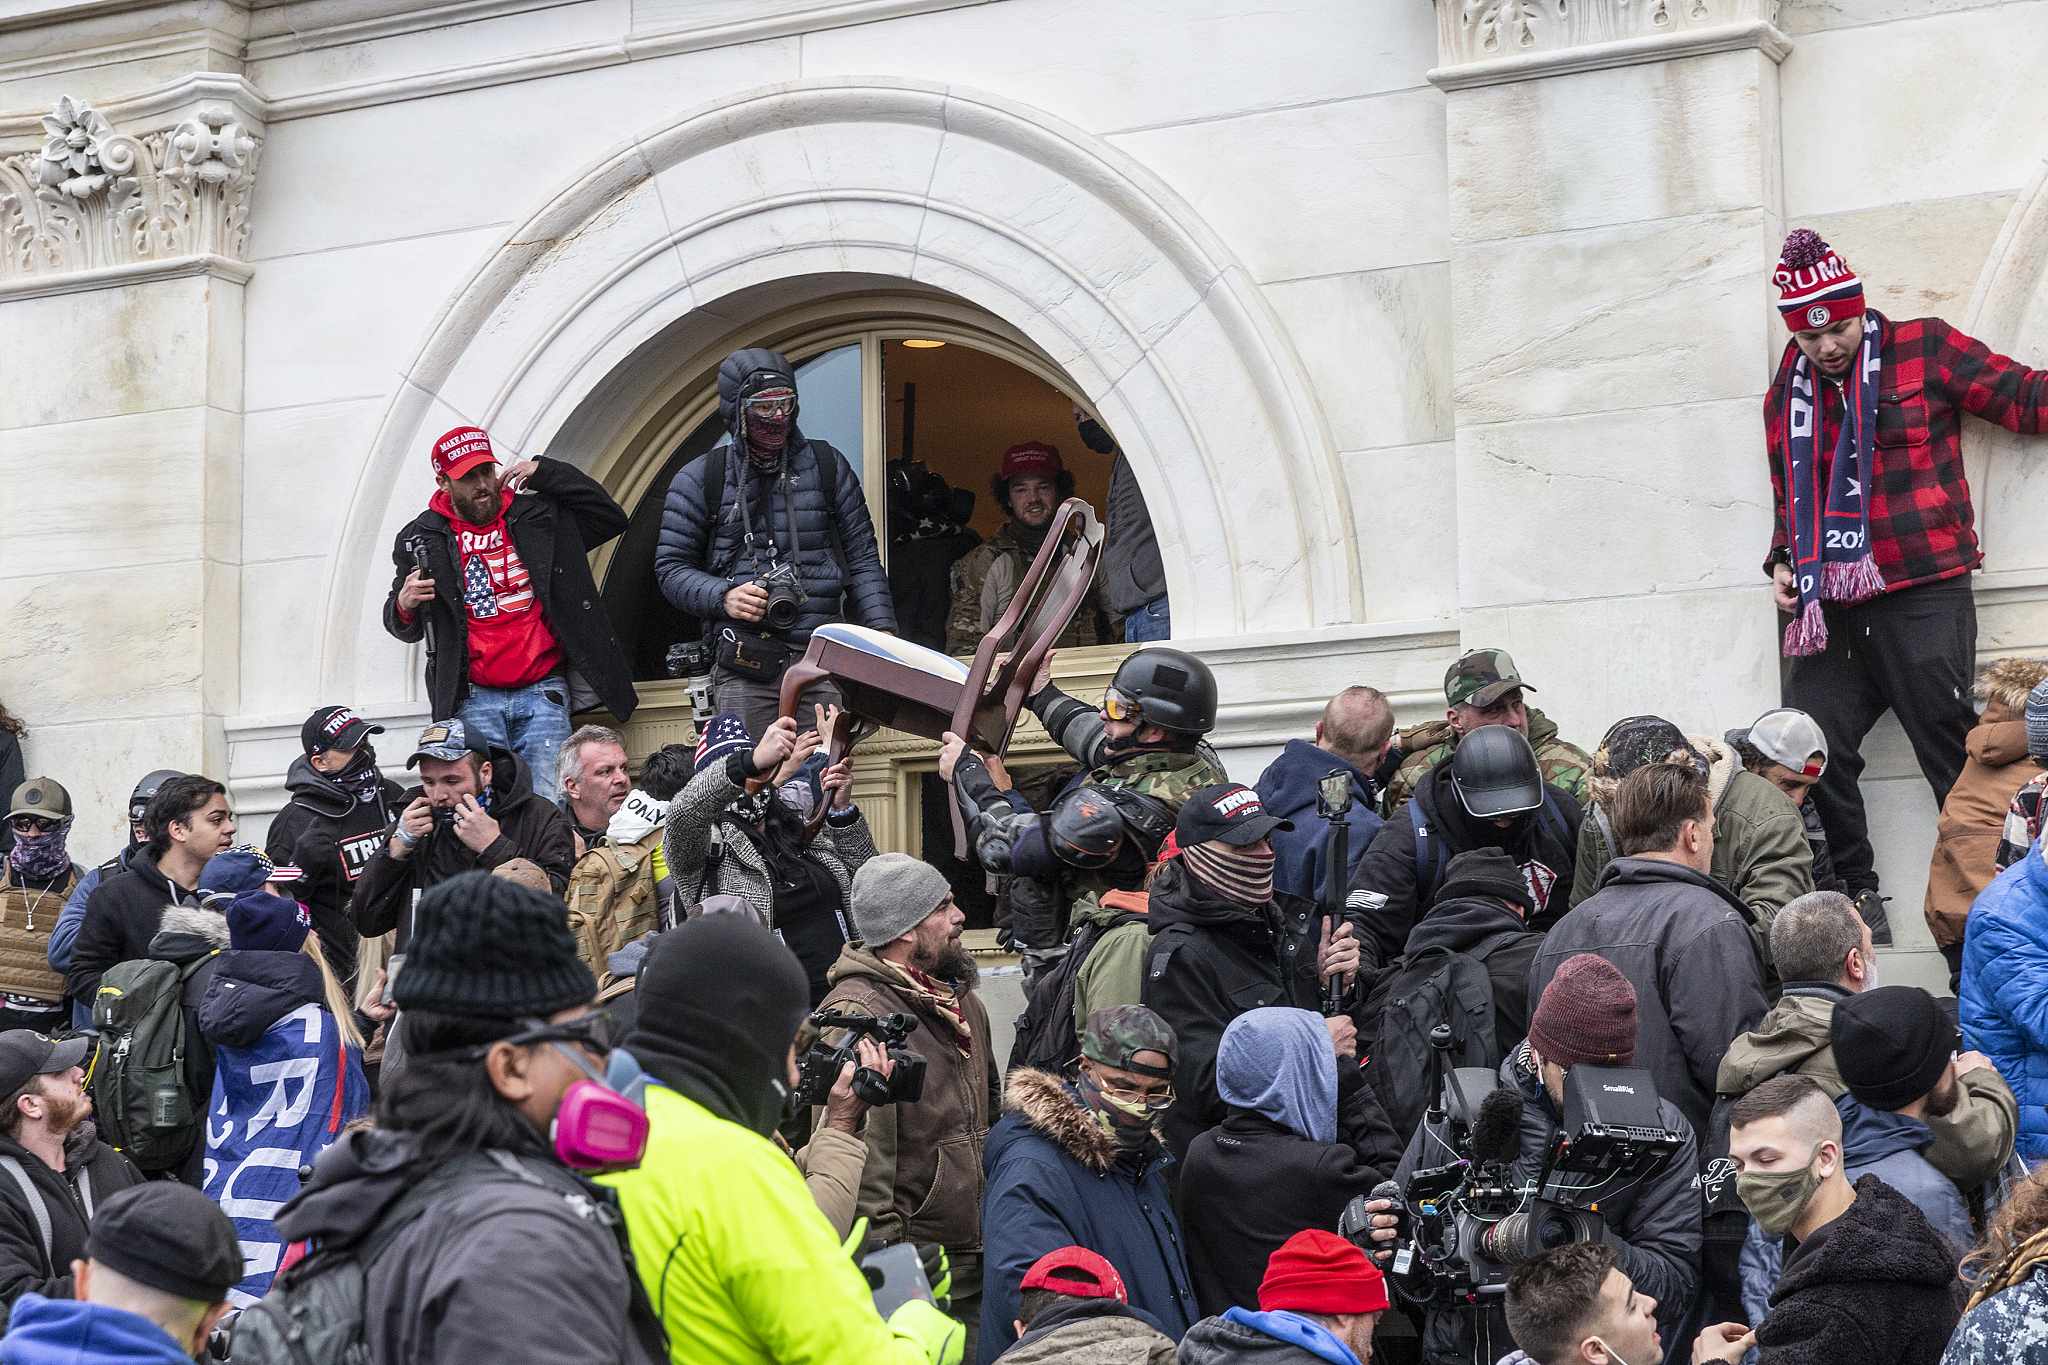 Supporters of former U.S. President Donald Trump breached through the windows into Capitol building and threw furniture out in Washington, D.C., U.S., January 6, 2021. /VCG